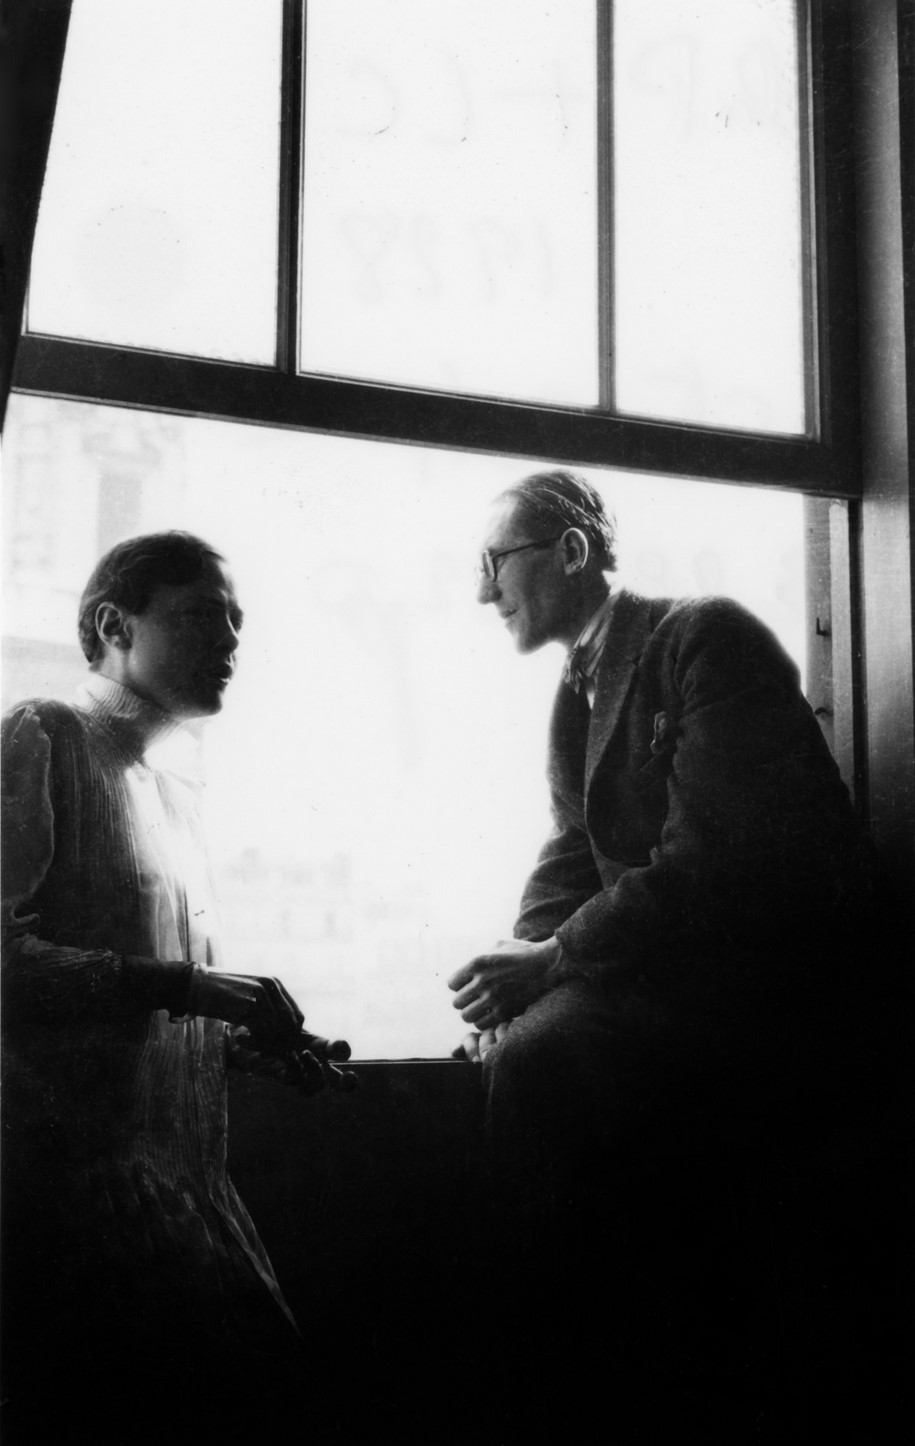 Archisearch Τα τρία δάχτυλα ενός χεριού: Le Corbusier - Pierre Jeanneret - Charlotte Perriand  | 27 Ιουνίου – 9 Σεπτεμβρίου, El Greco Athens